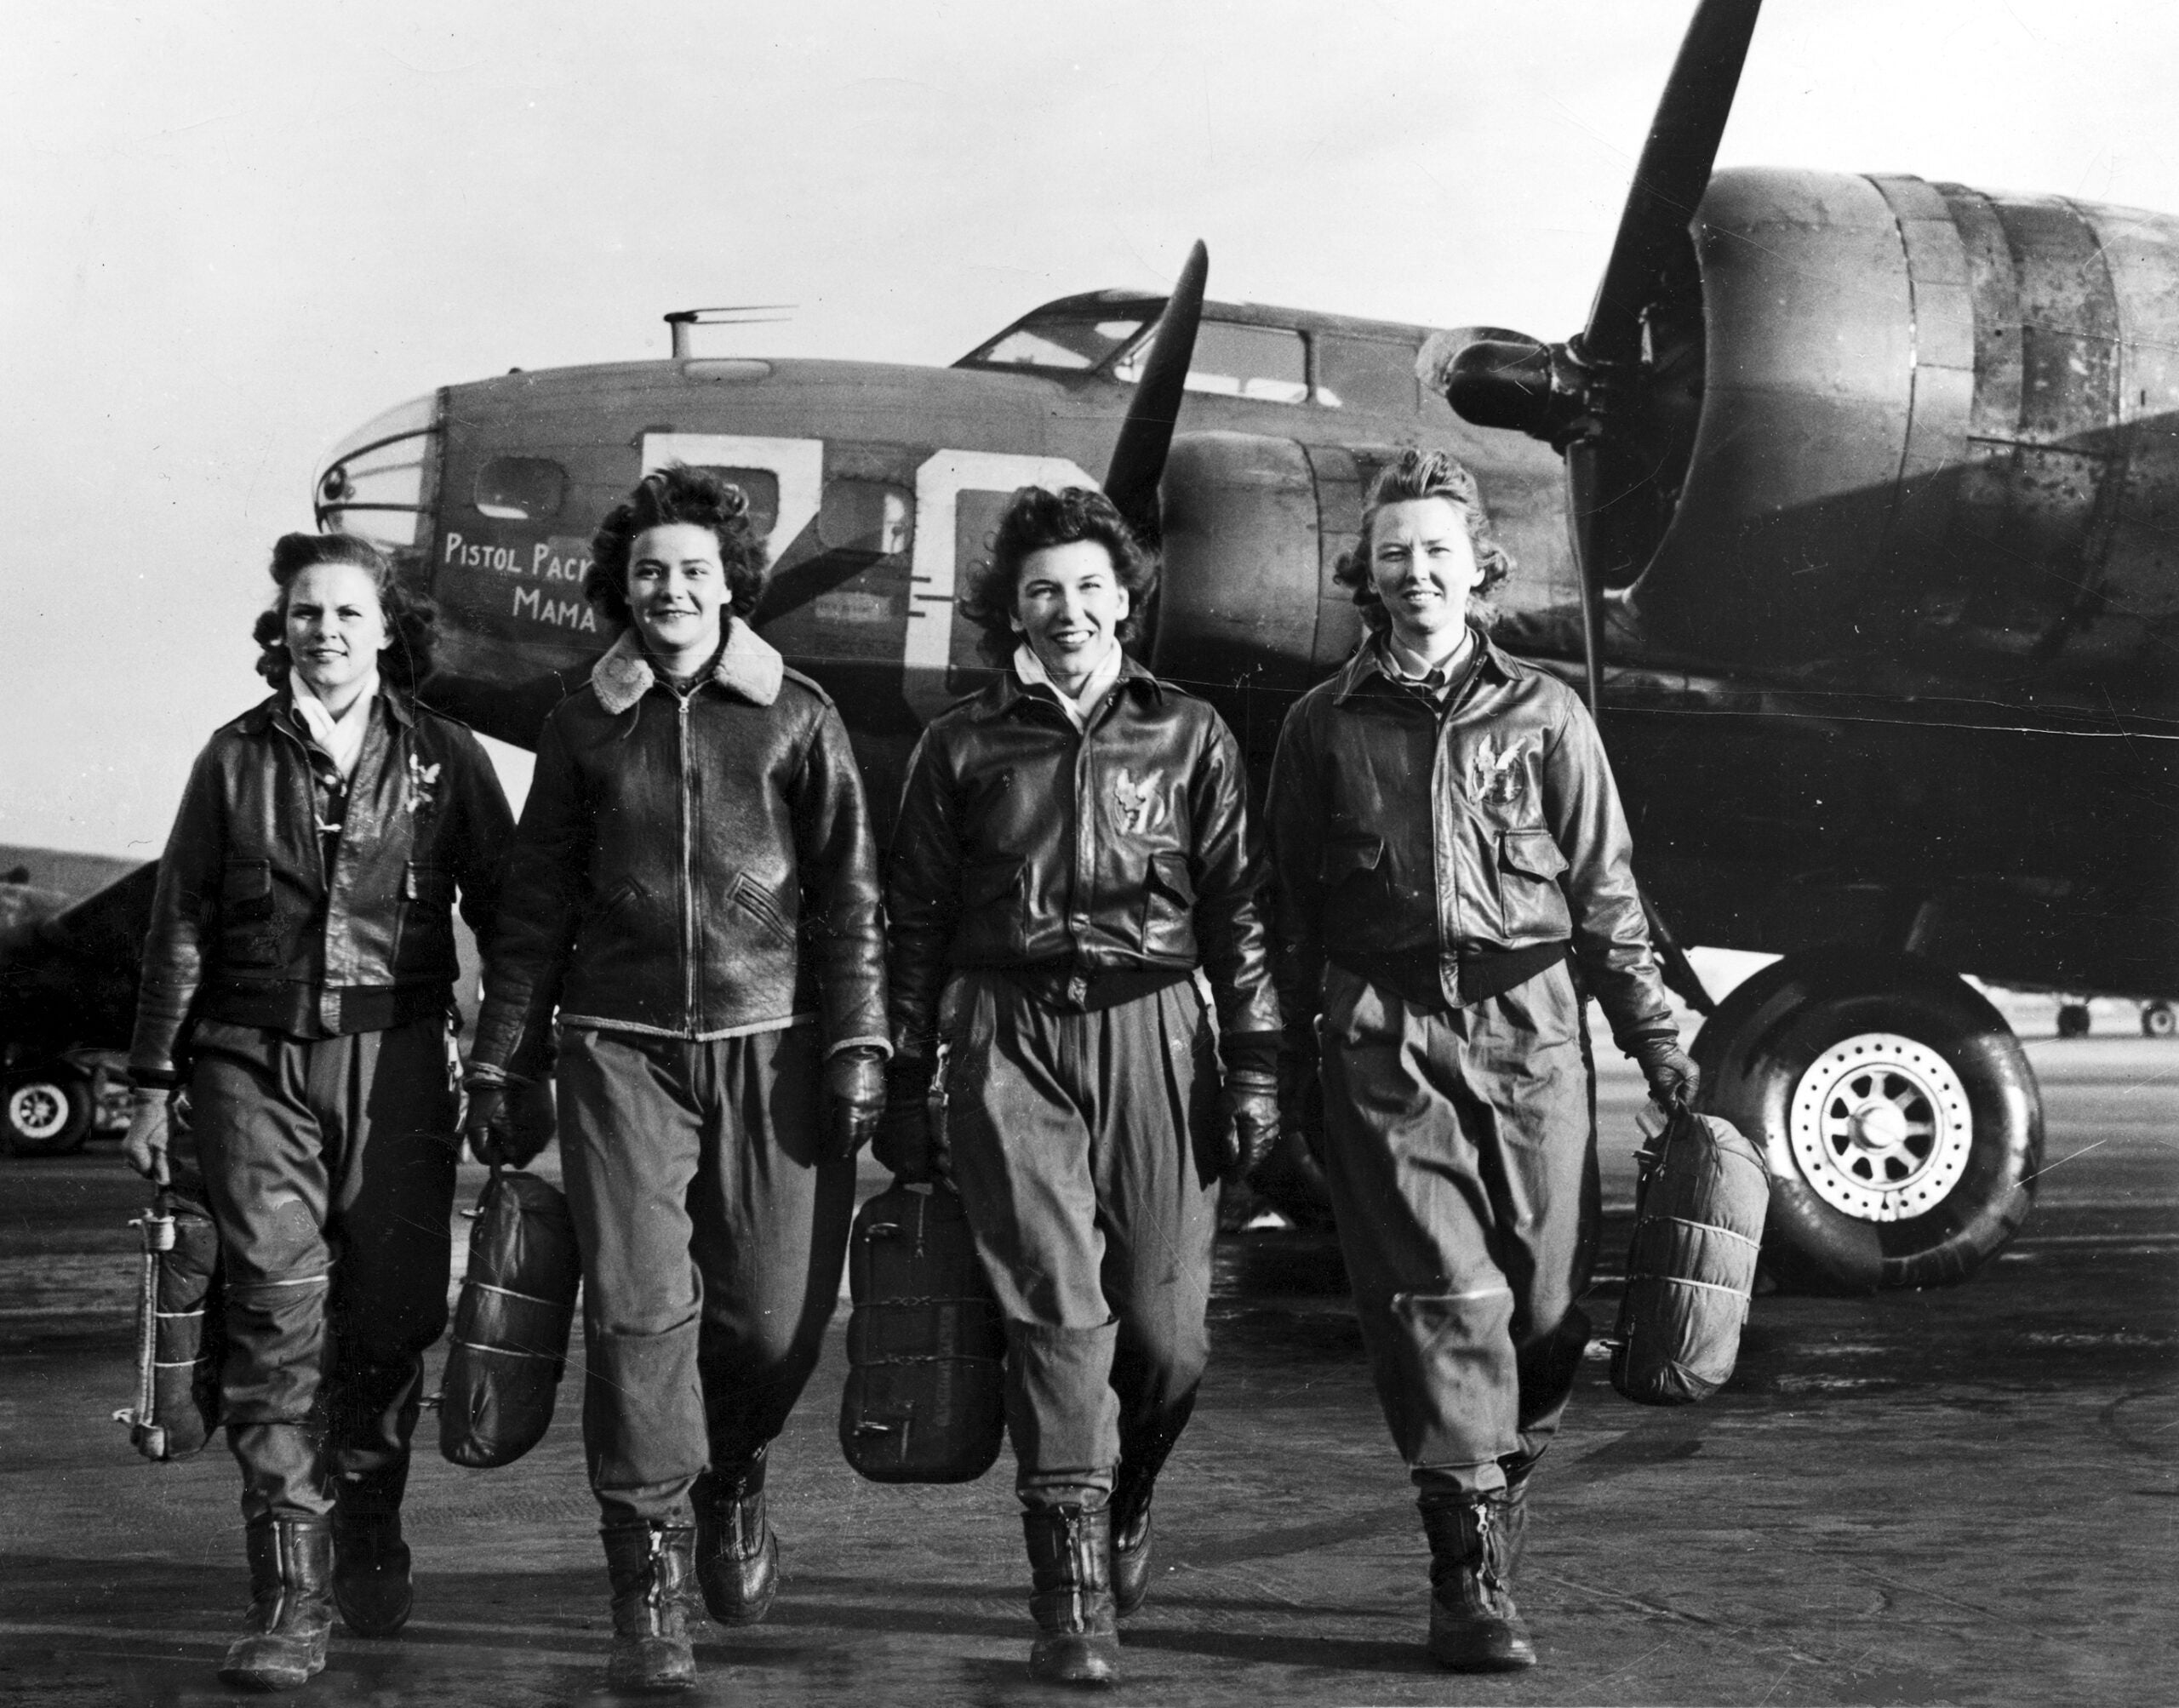 Women Airforce Service pilots Frances Green, Margaret 'Peg' Kirchner, Ann Waldner and Blanche Osborn, leave their B-17 Flying Fortress aircraft, 'Pistol Packin' Mama,' during ferry training at Lockbourne Army Airfield, Ohio, 1944